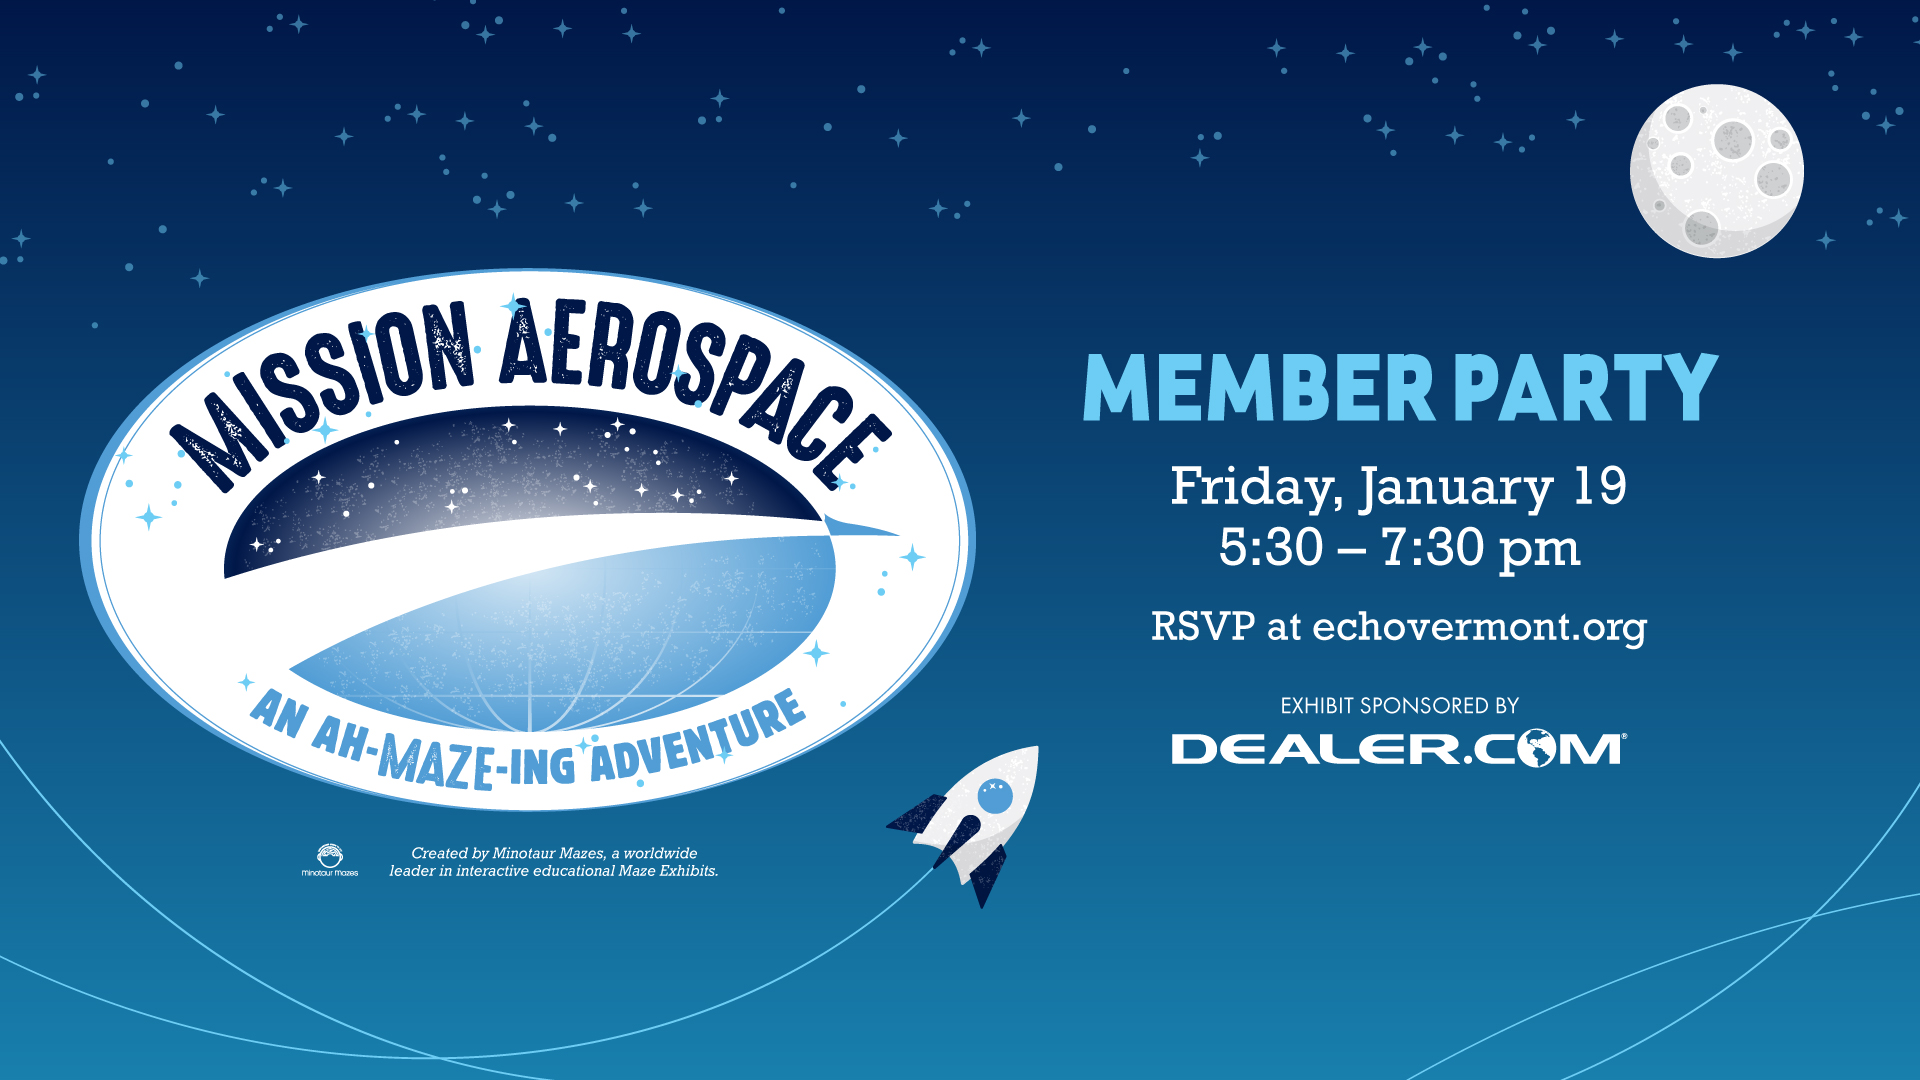 Graphic with a dark blue background and Mission Aerospace logo. Text reads "Member Party Friday, January 19, 5:30-7:30 pm. RSVP at echovermont.org"